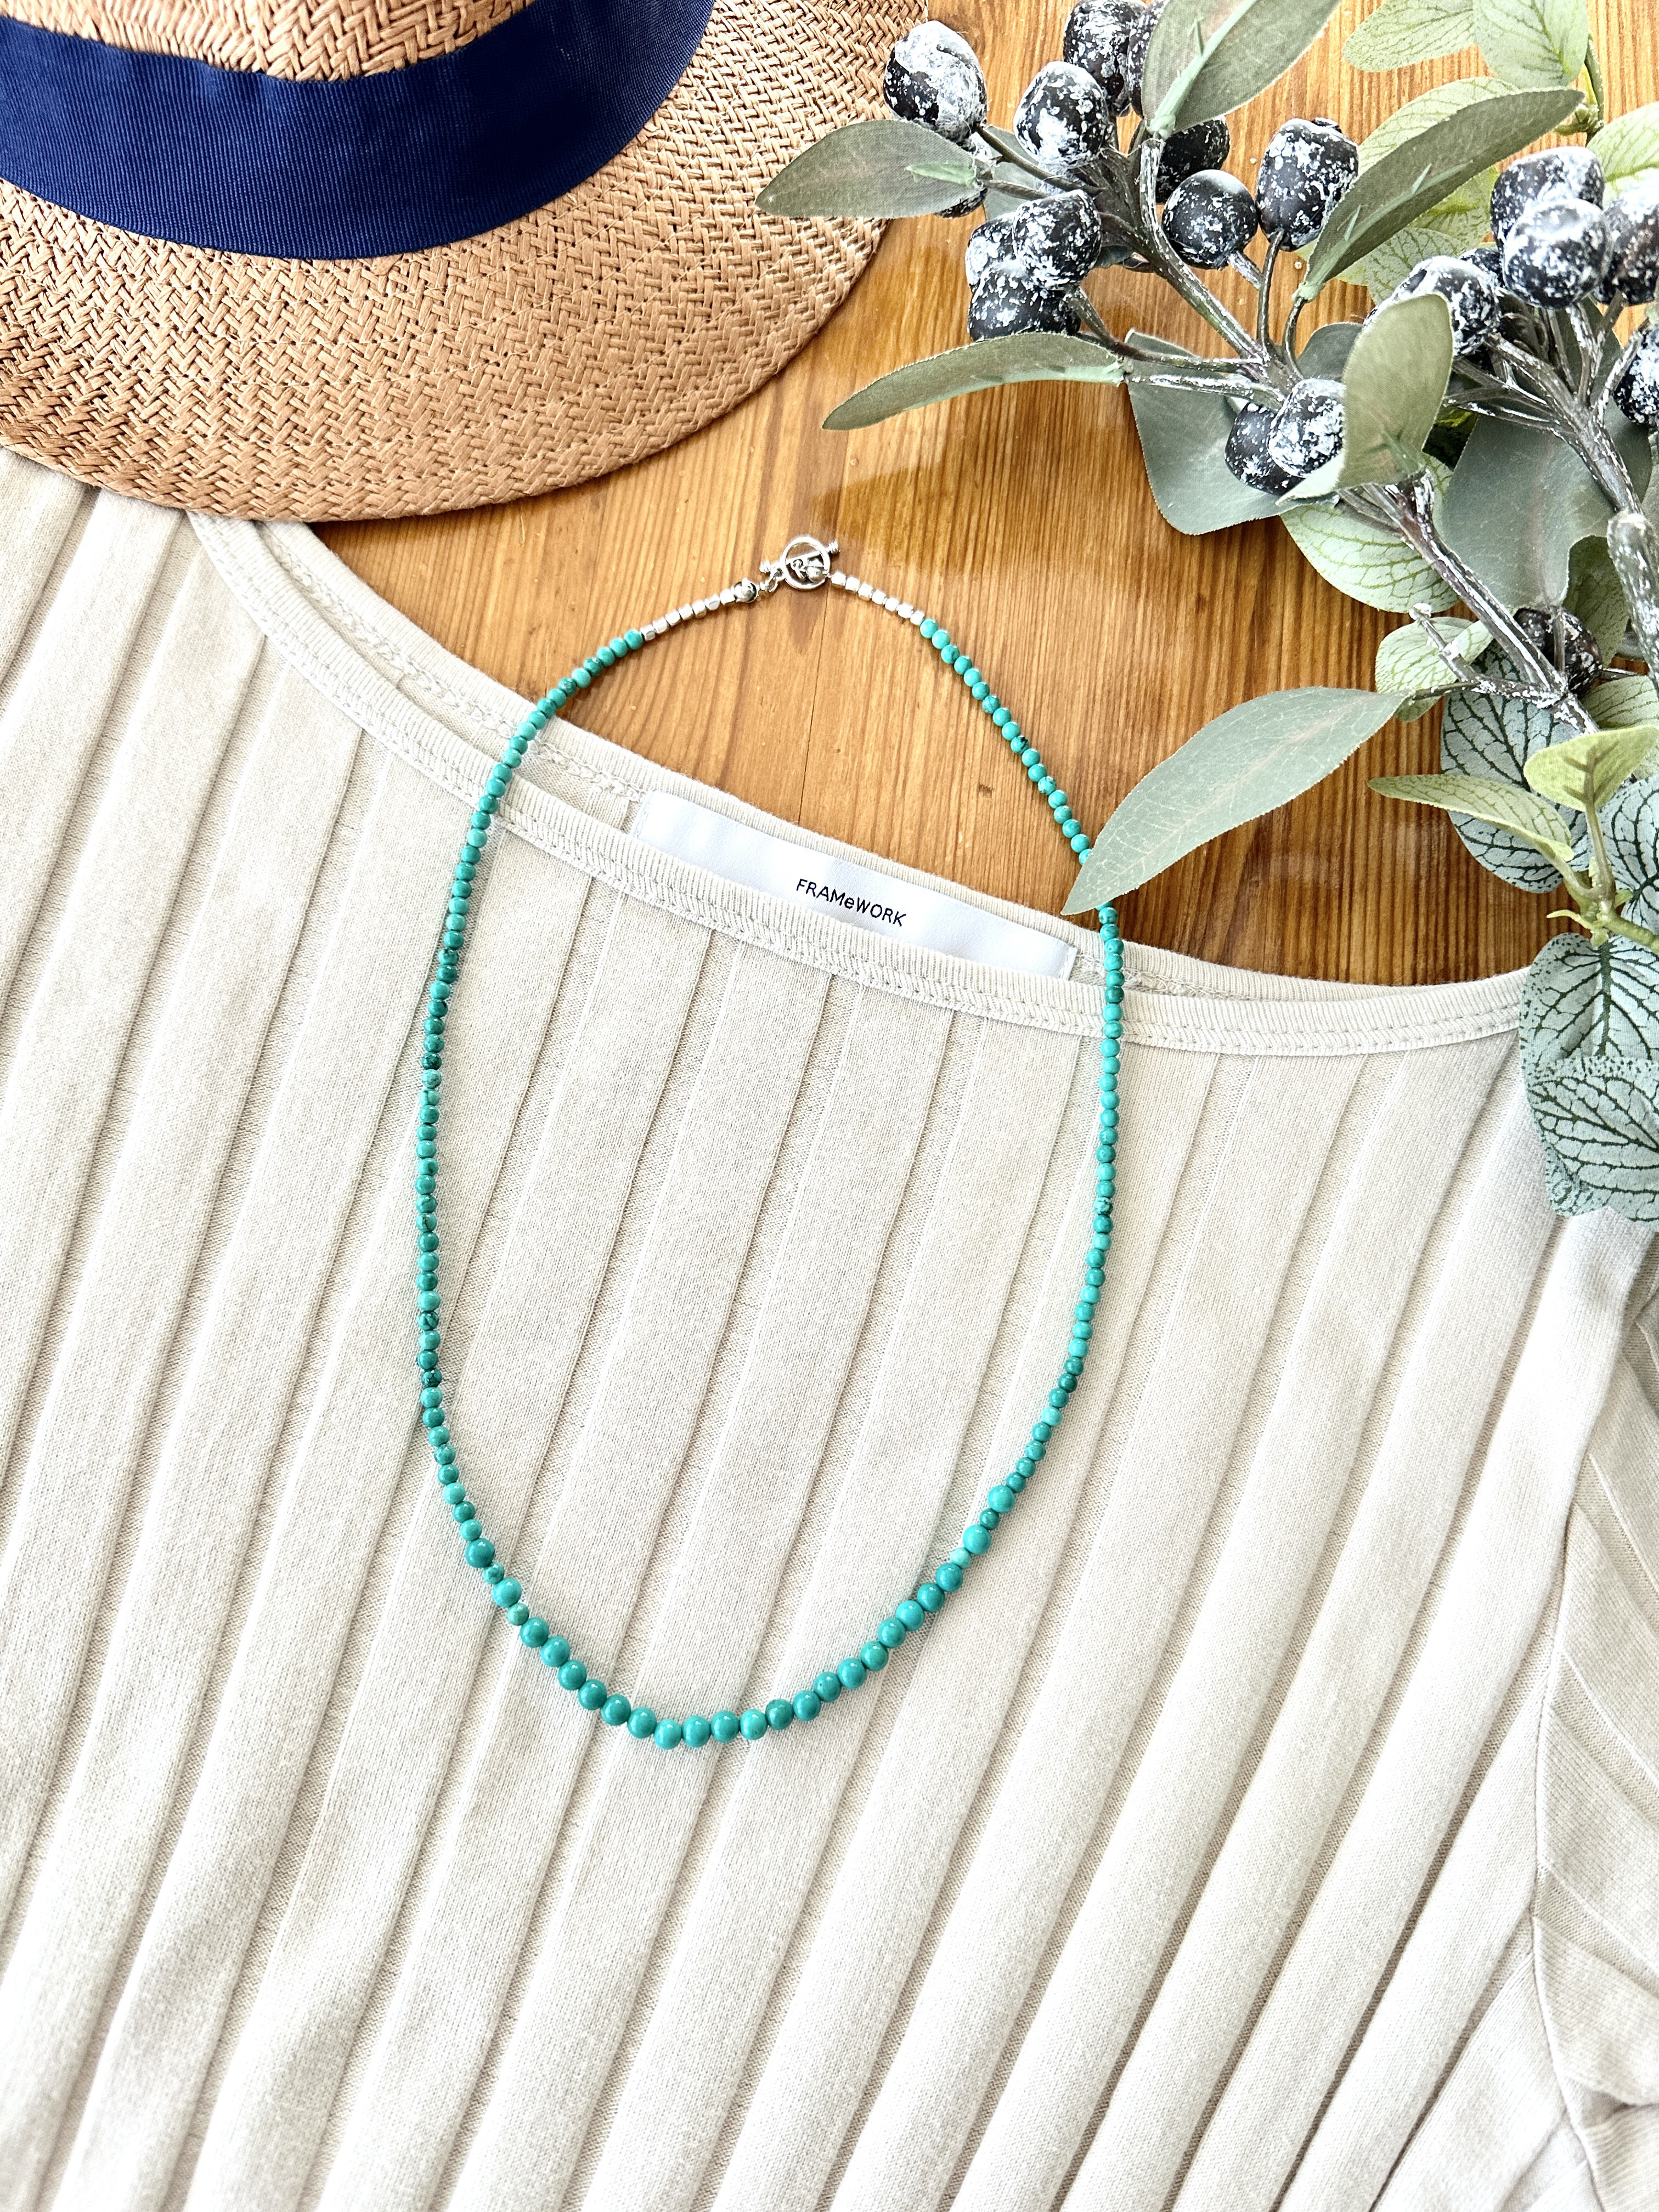 Necklace Turquoise blue 】天然石ターコイズのネックレス トルコ石